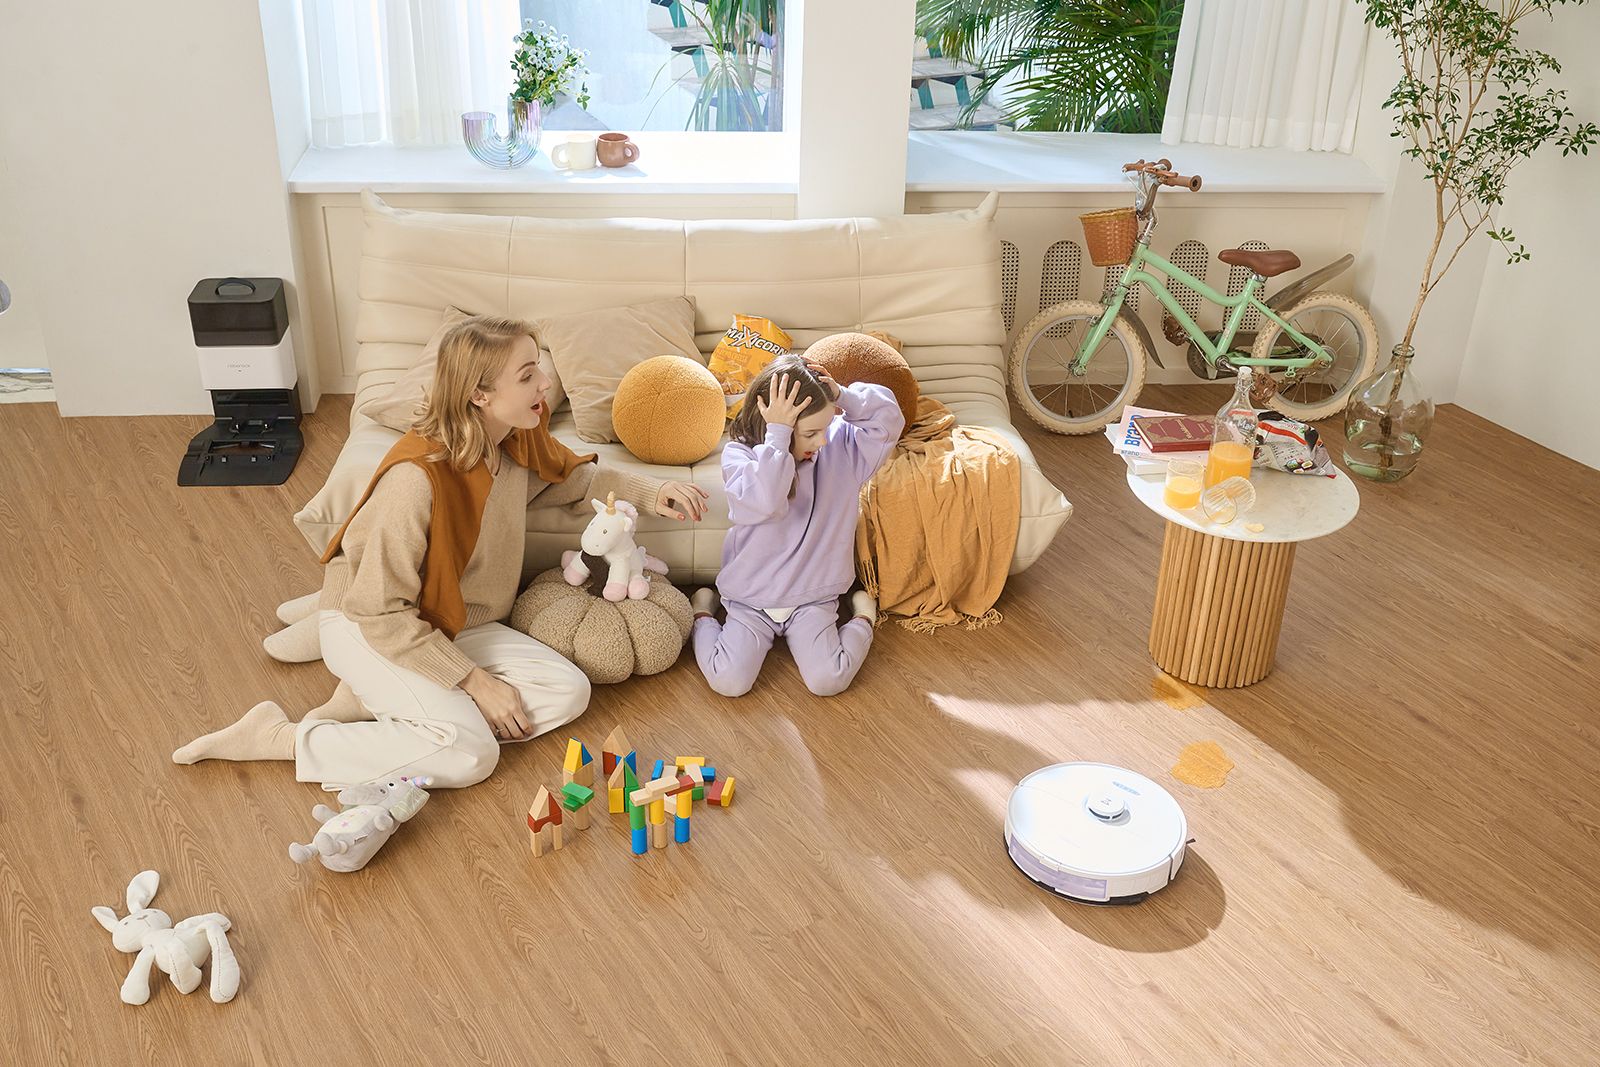 The Roborock S8+ vacuum cleans up spills while a girl and her mother watch